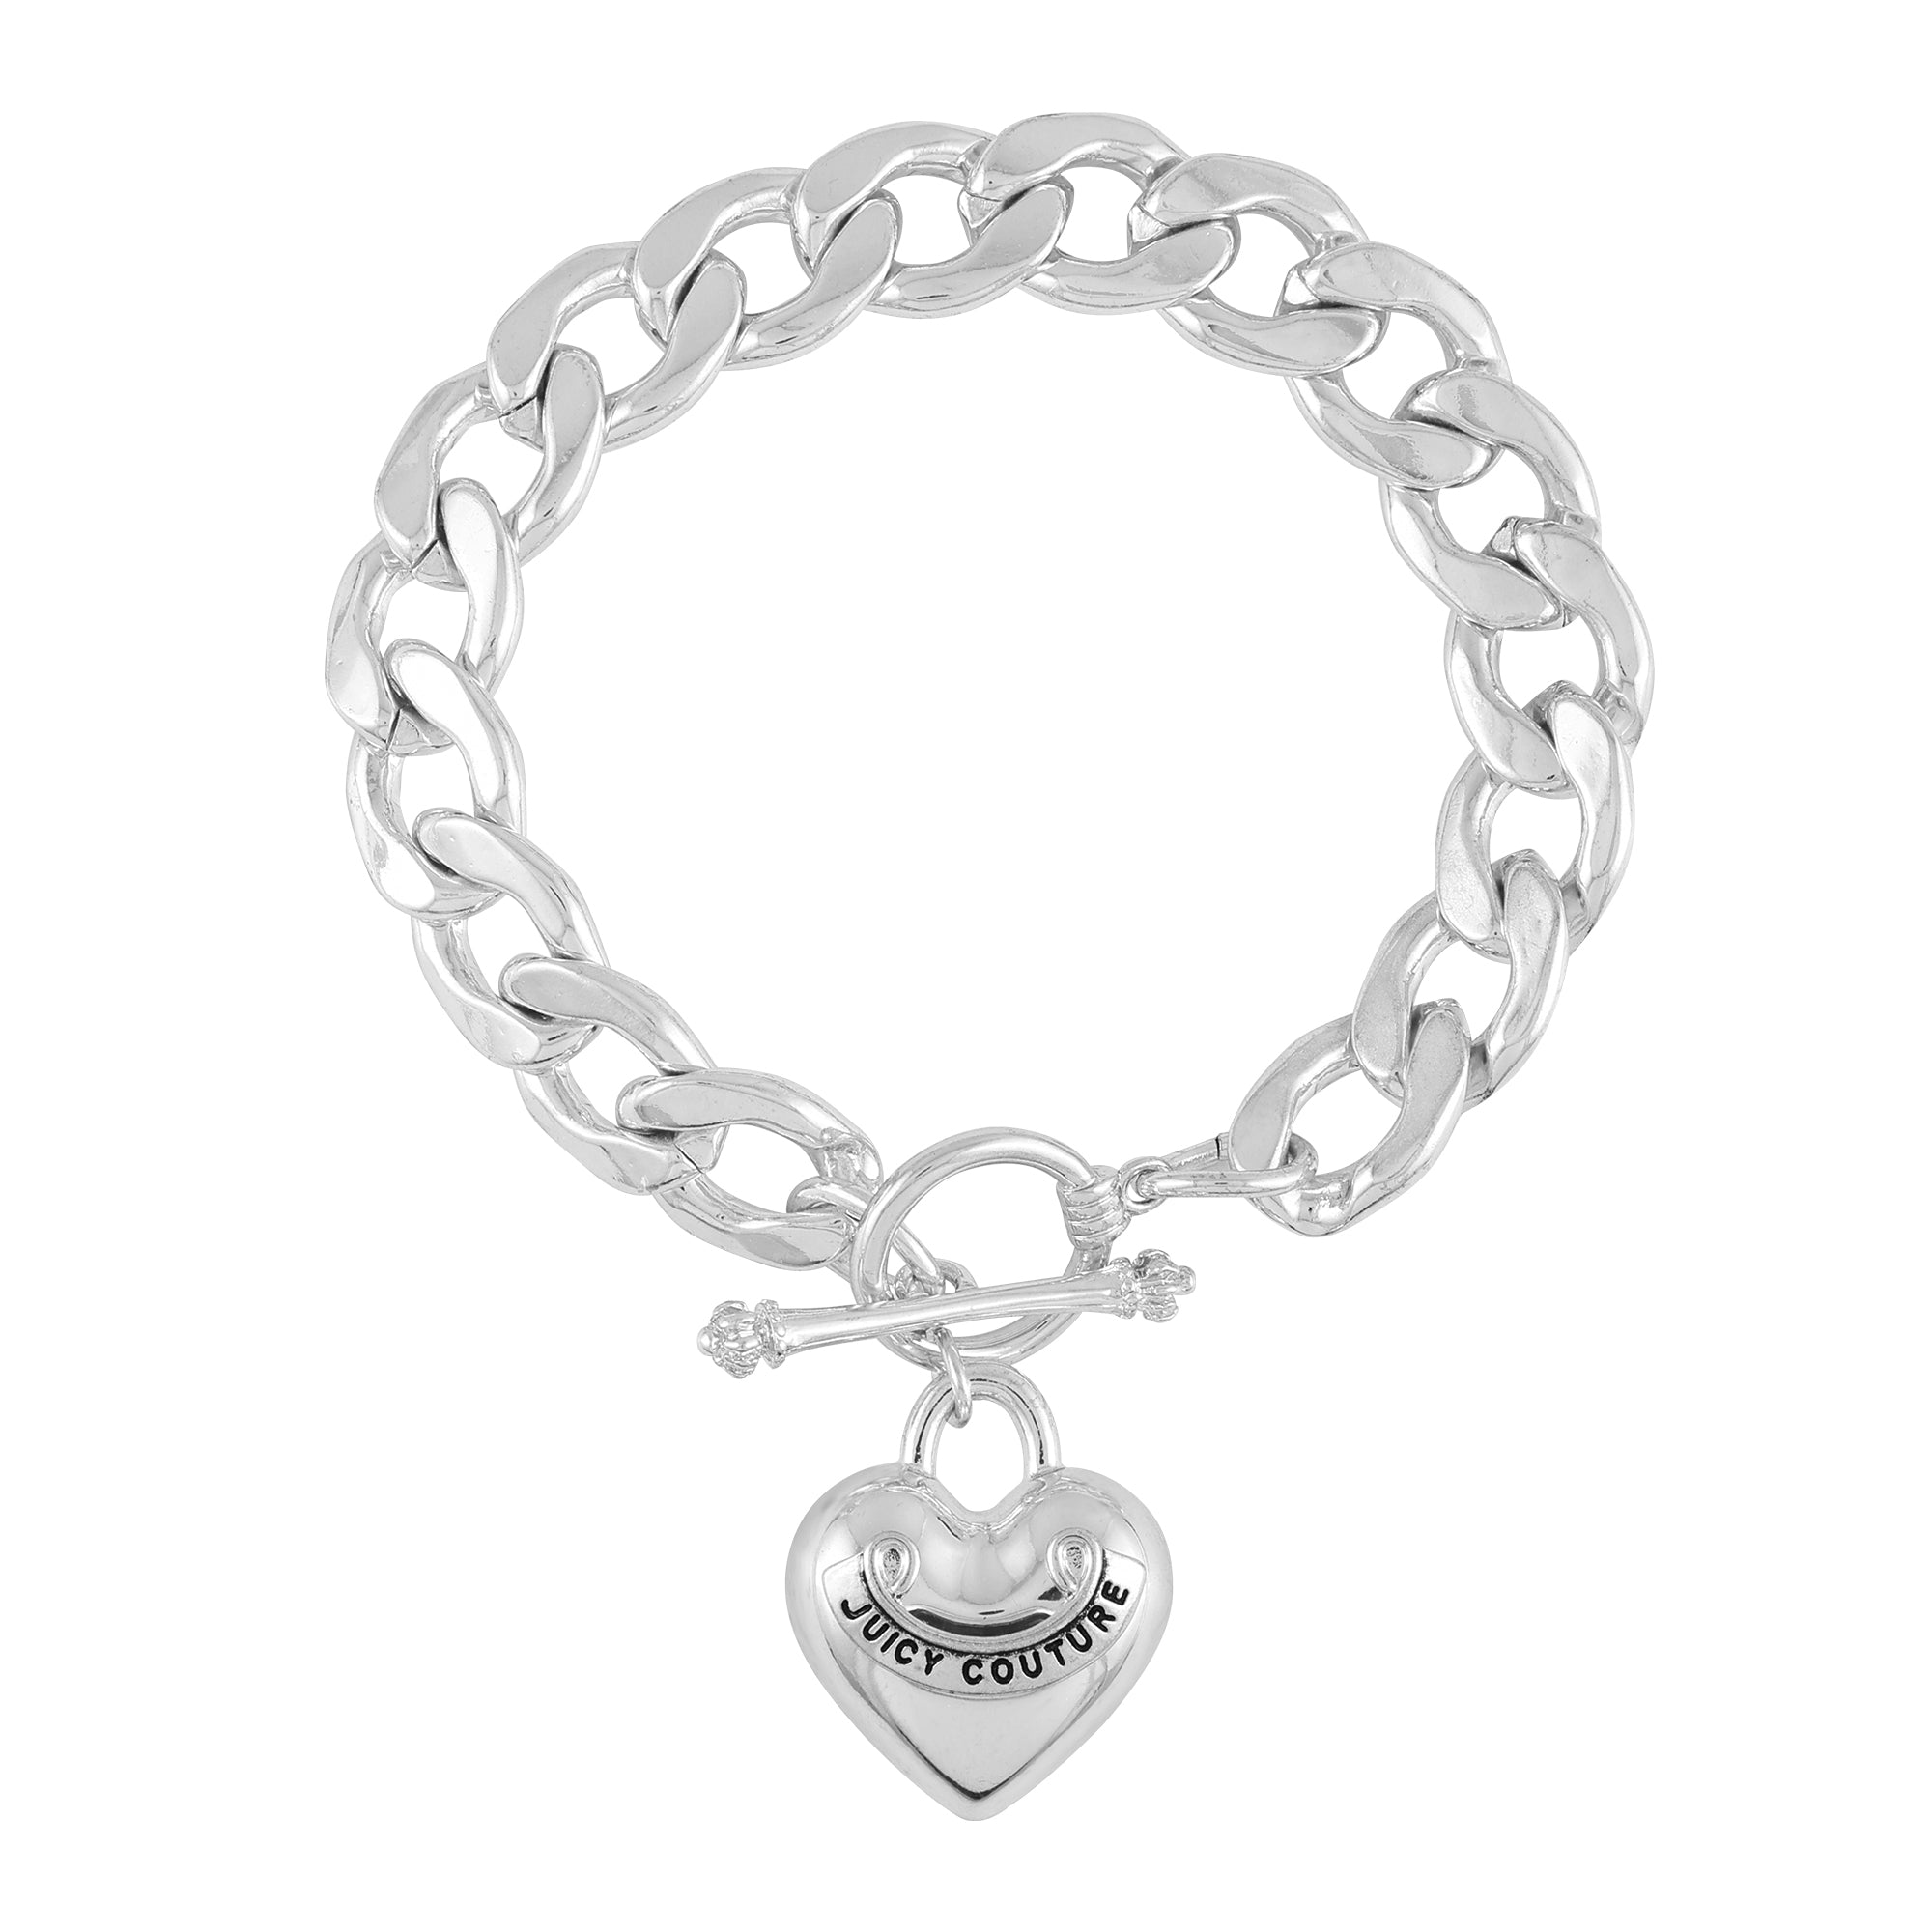 Juicy Couture, Jewelry, Juicy Couture Bracelet Silver Iconic Heart J  Cherry Crown Bling Bling